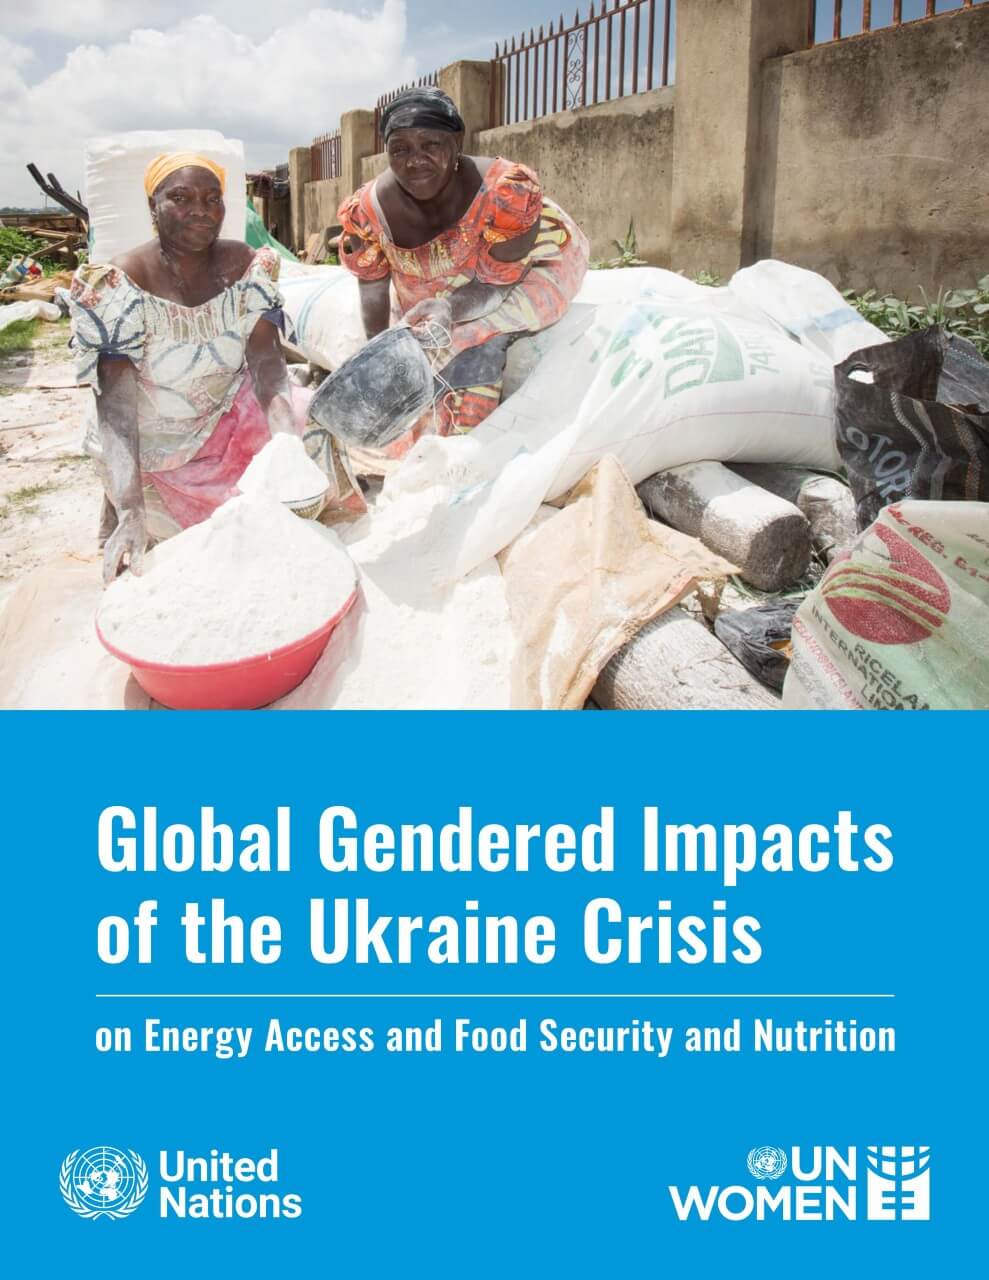 Global gendered impacts of the Ukraine crisis on energy access and food, security, and nutrition